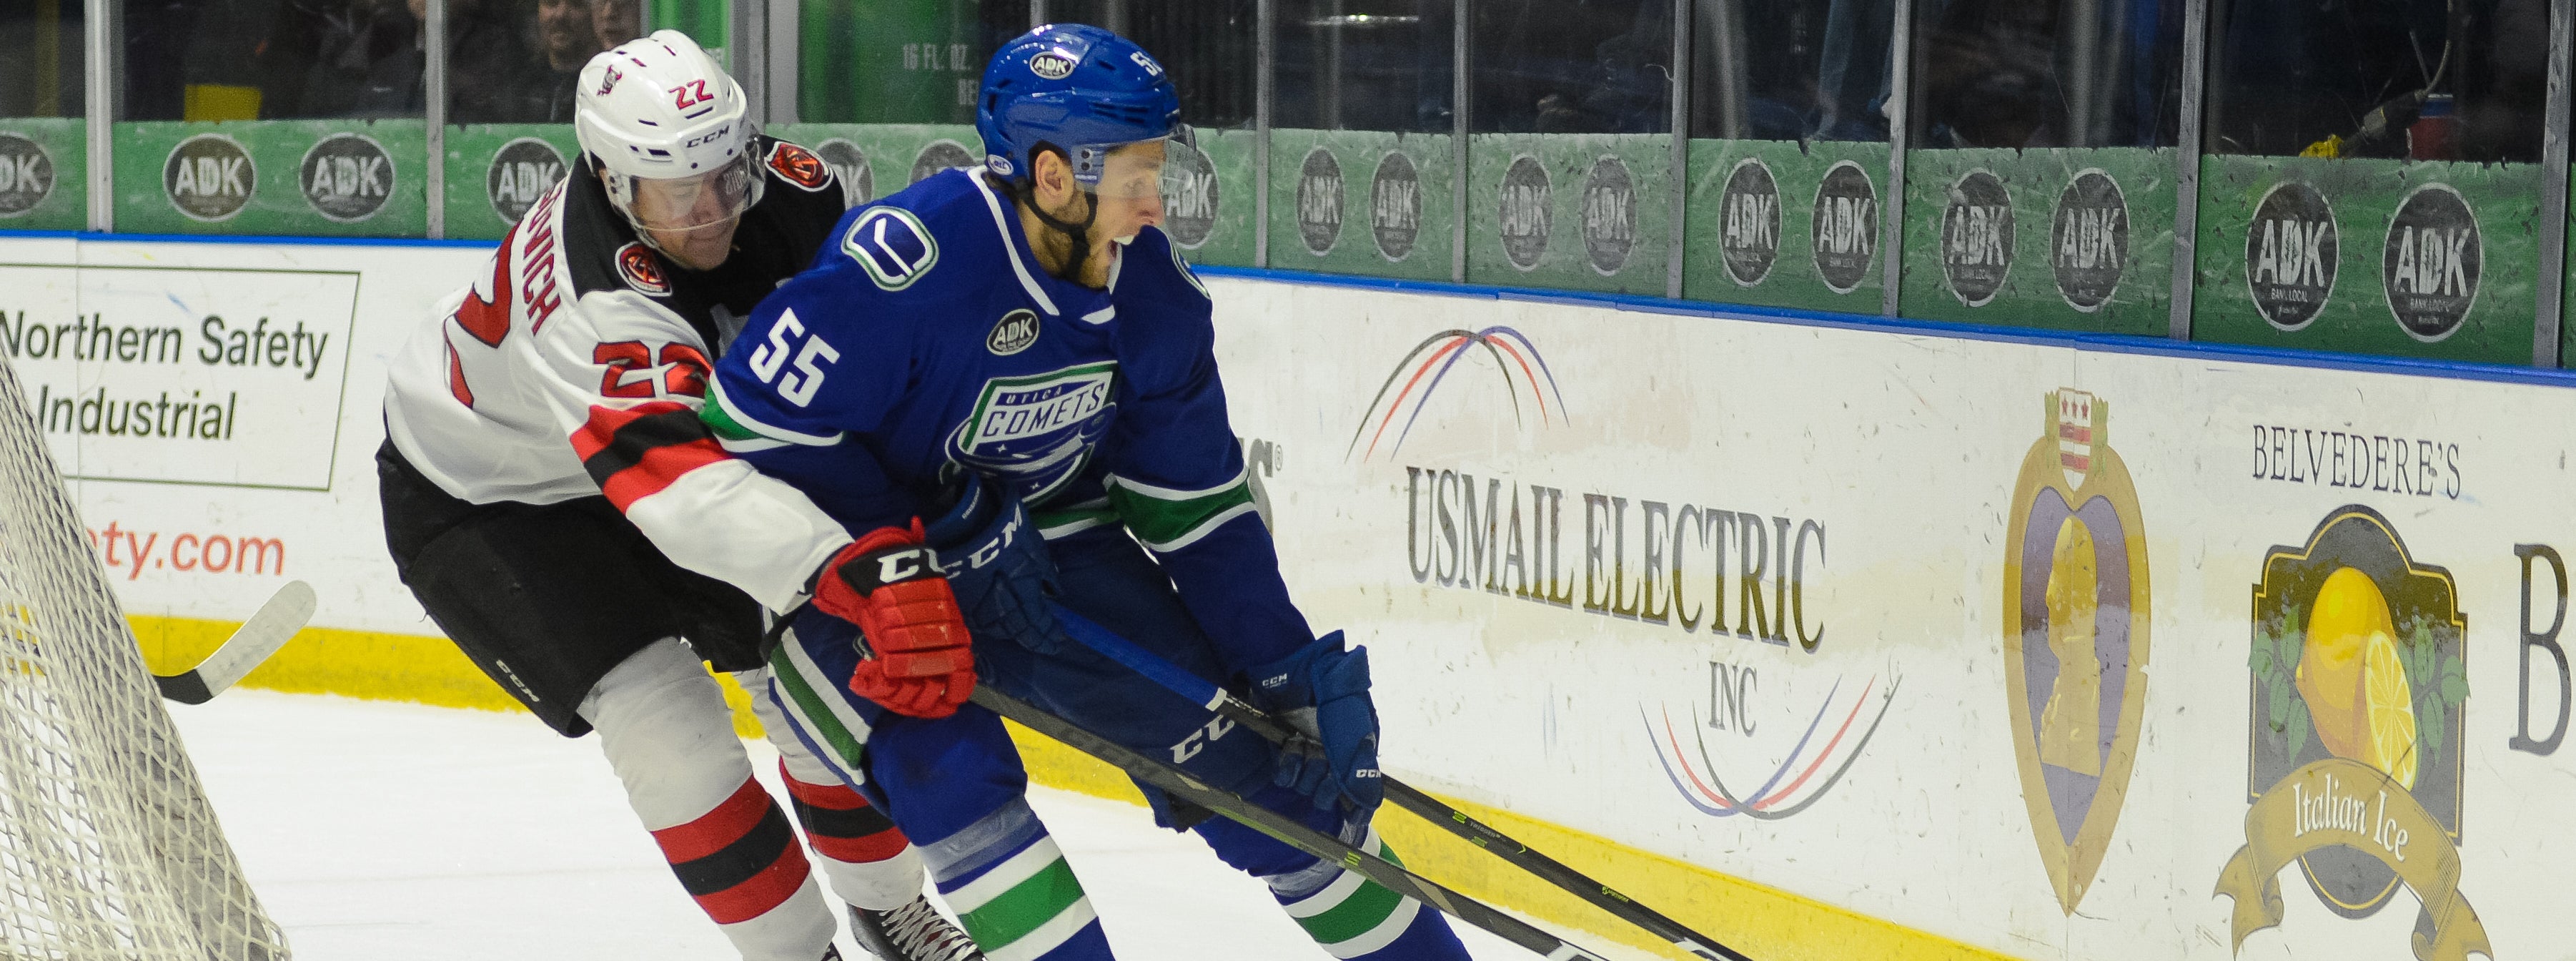 COMETS TRAVEL TO BINGHAMTON TO FACE DEVILS